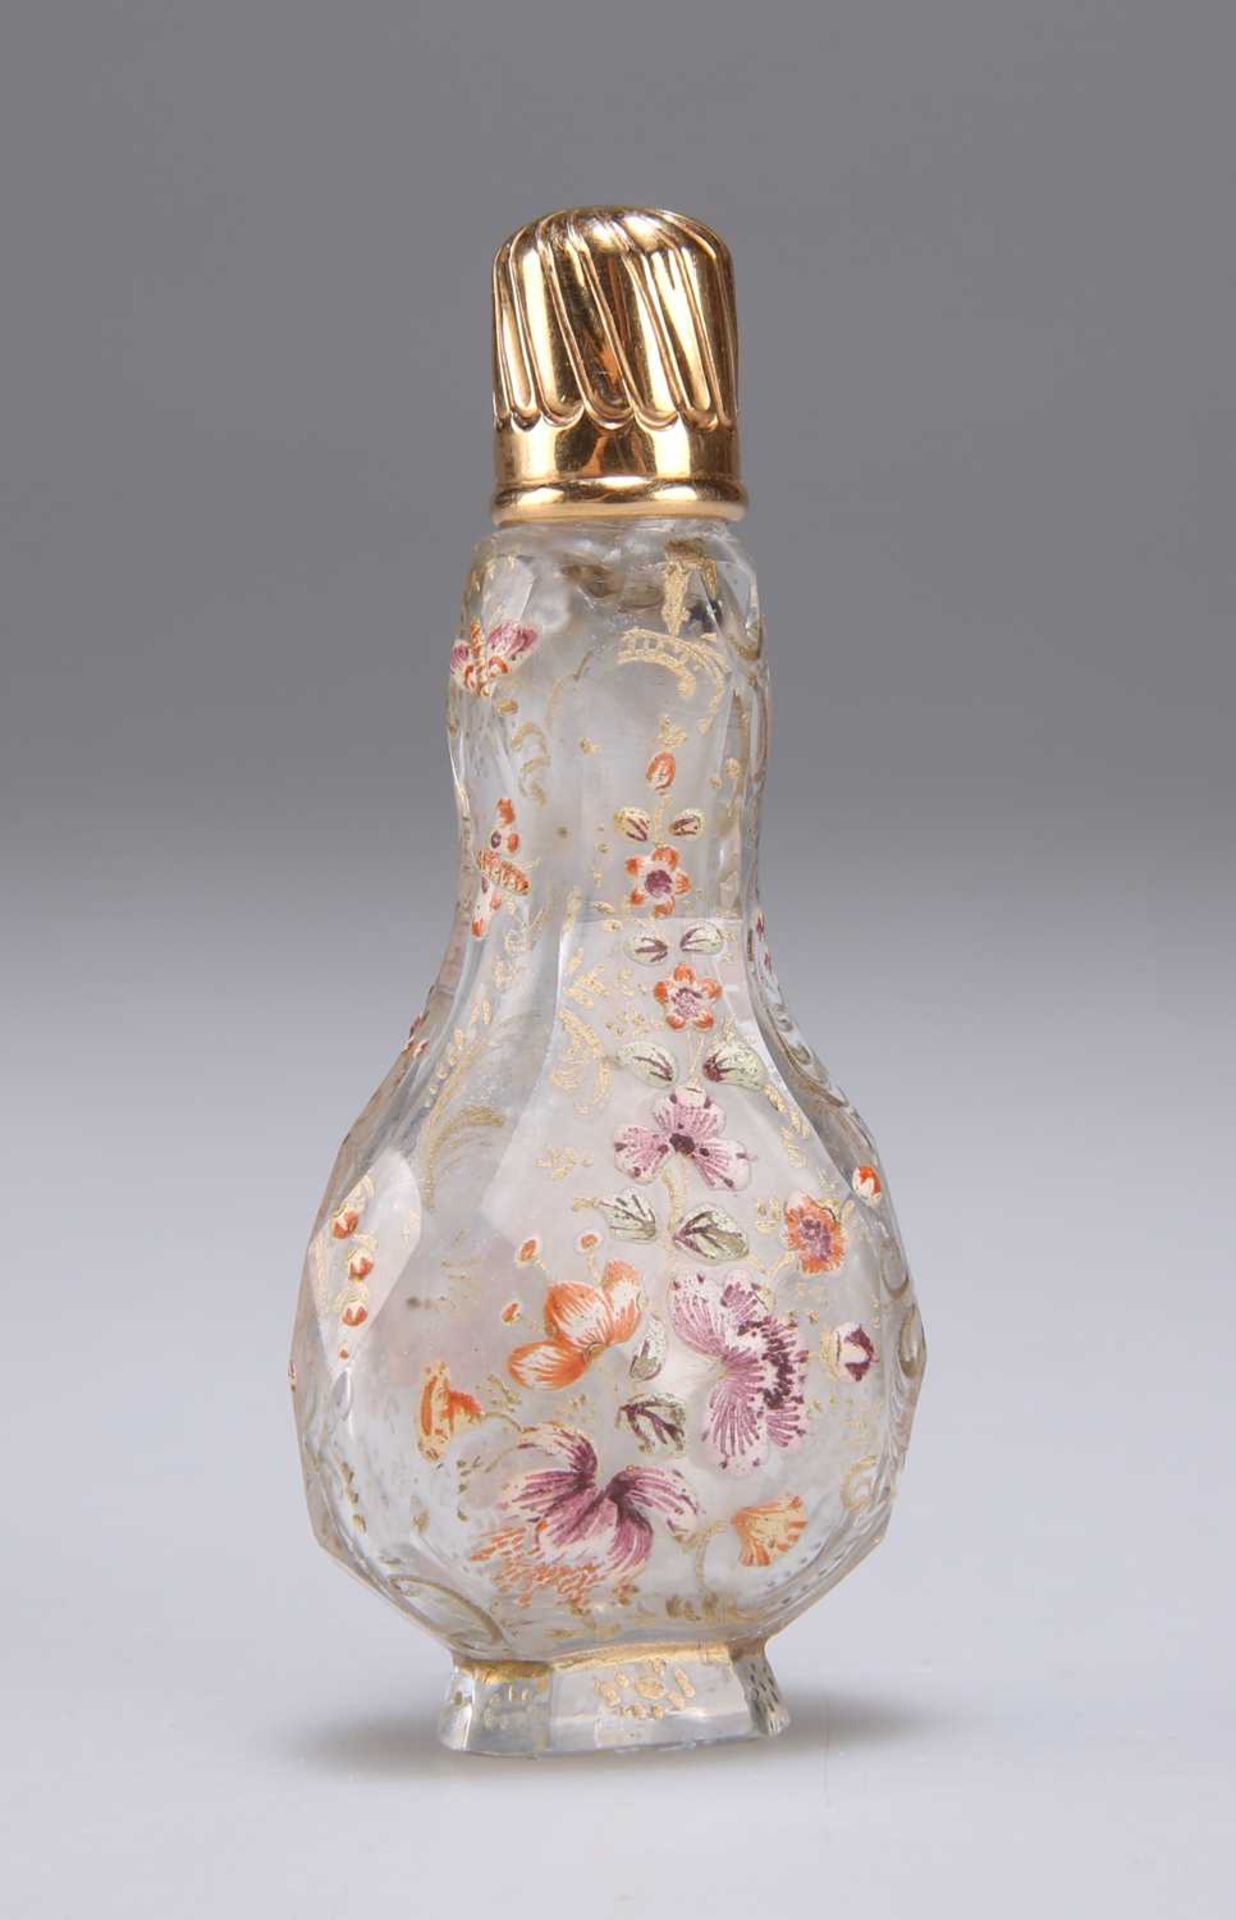 A GLASS SCENT BOTTLE, CIRCA 1760-70, PROBABLY DECORATED IN THE LONDON ATELIER OF JAMES GILES